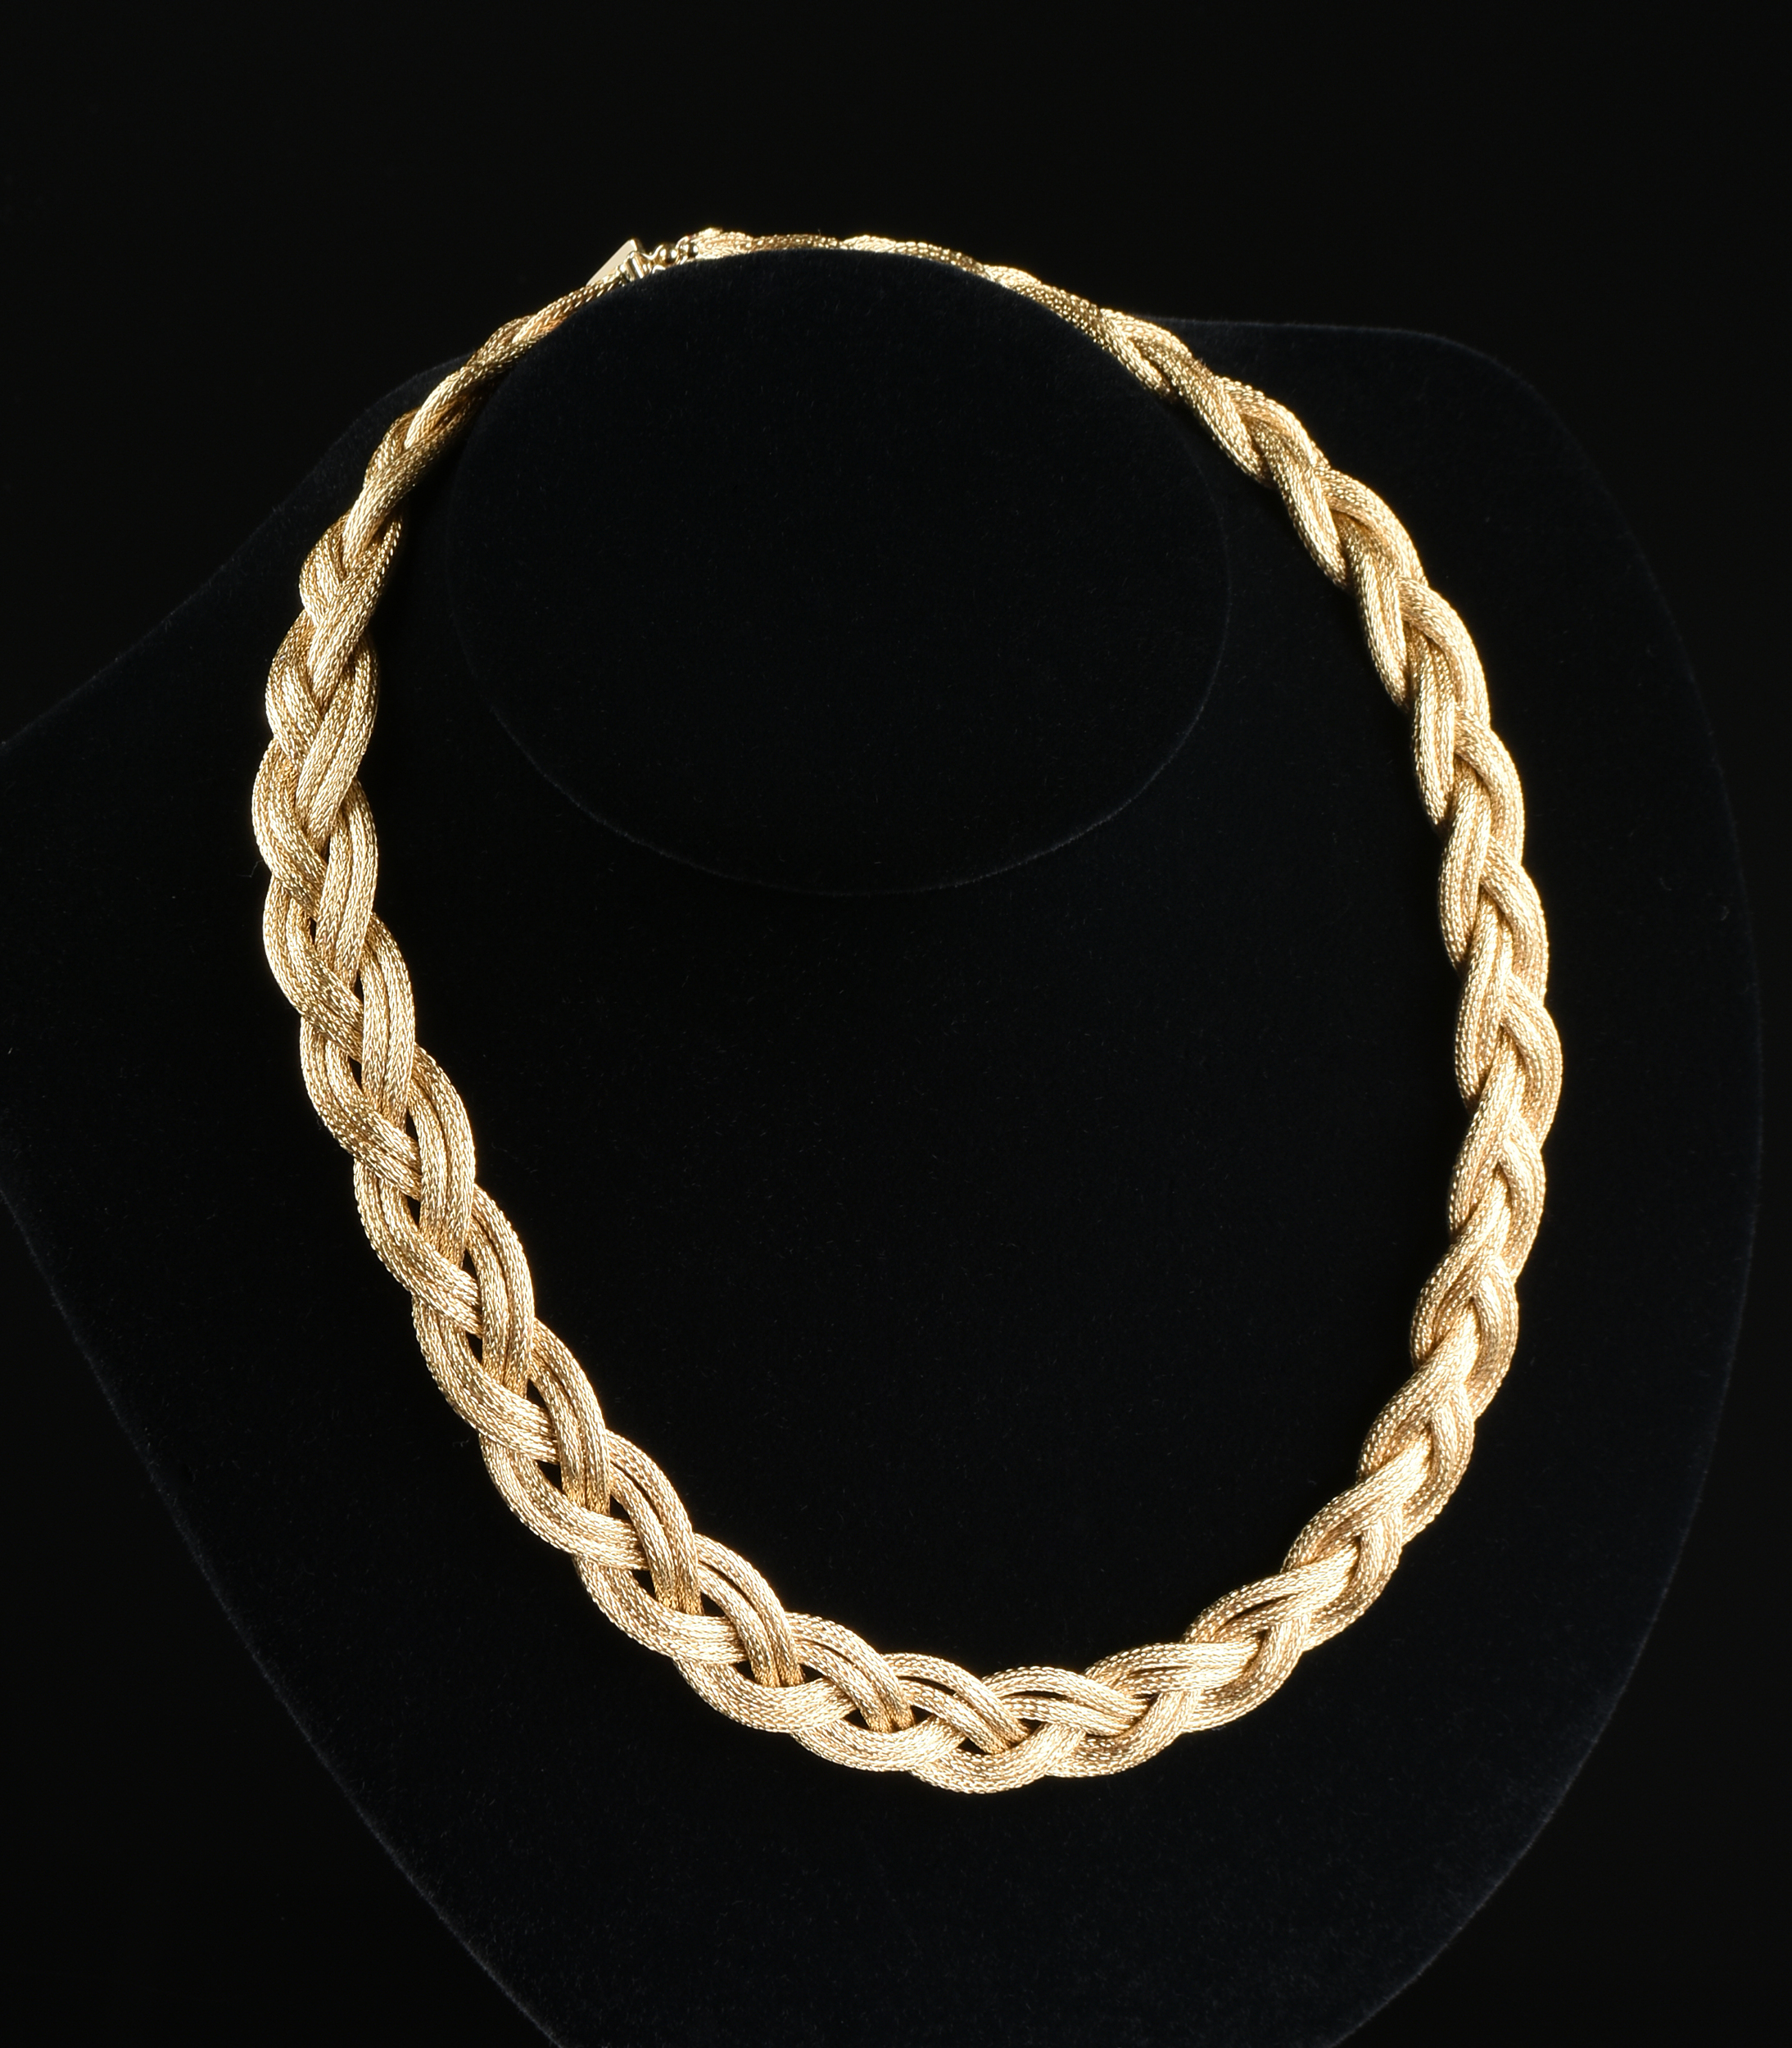 AN 18K YELLOW GOLD GUCCI NECKLACE, the double rope braided design with hidden push-button box - Image 2 of 4